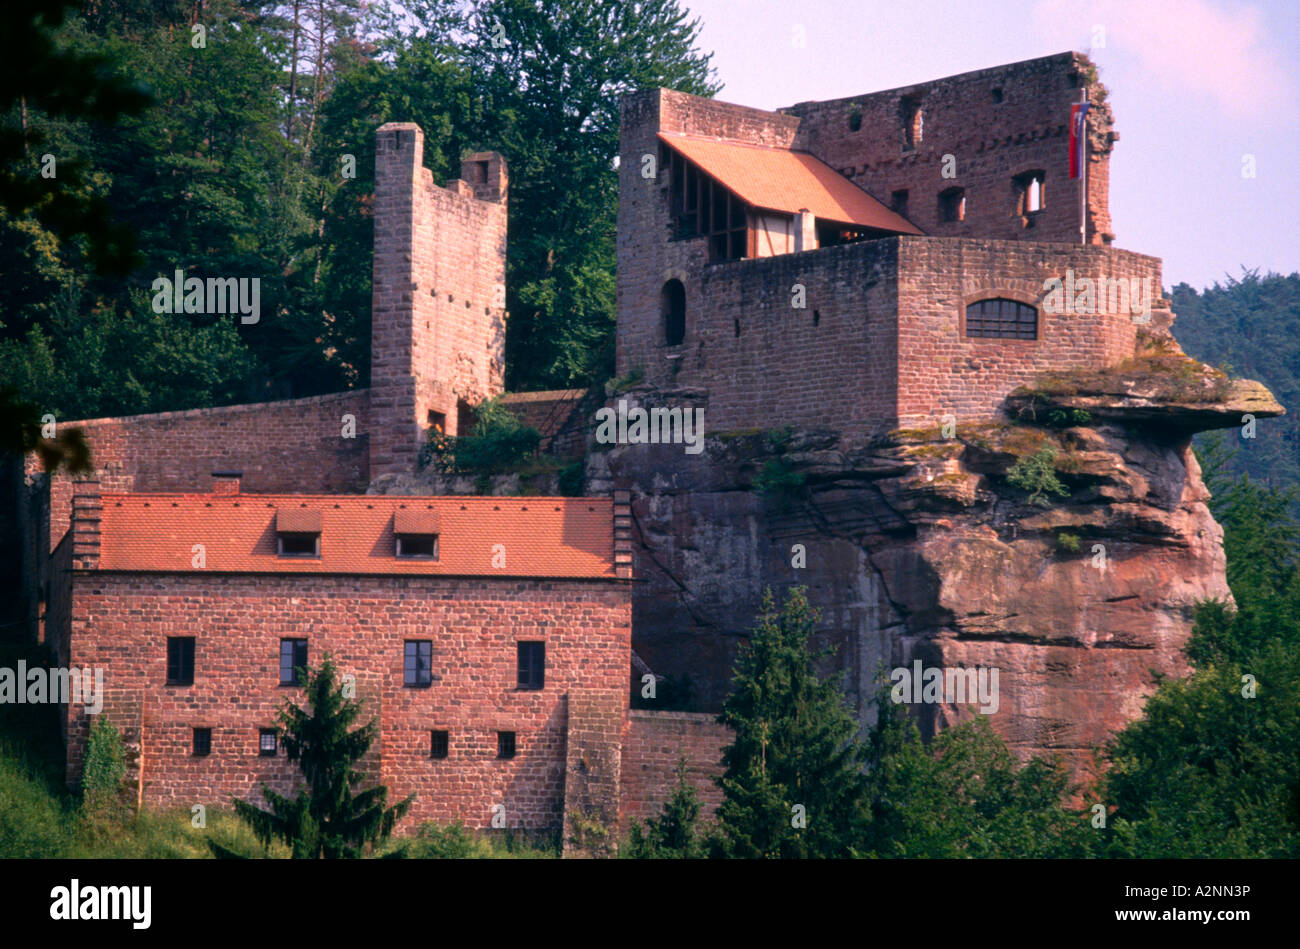 Old ruins of castle on hill, Spangenberg Castle, Palatinate forest, Elmstein Valley, Germany Stock Photo